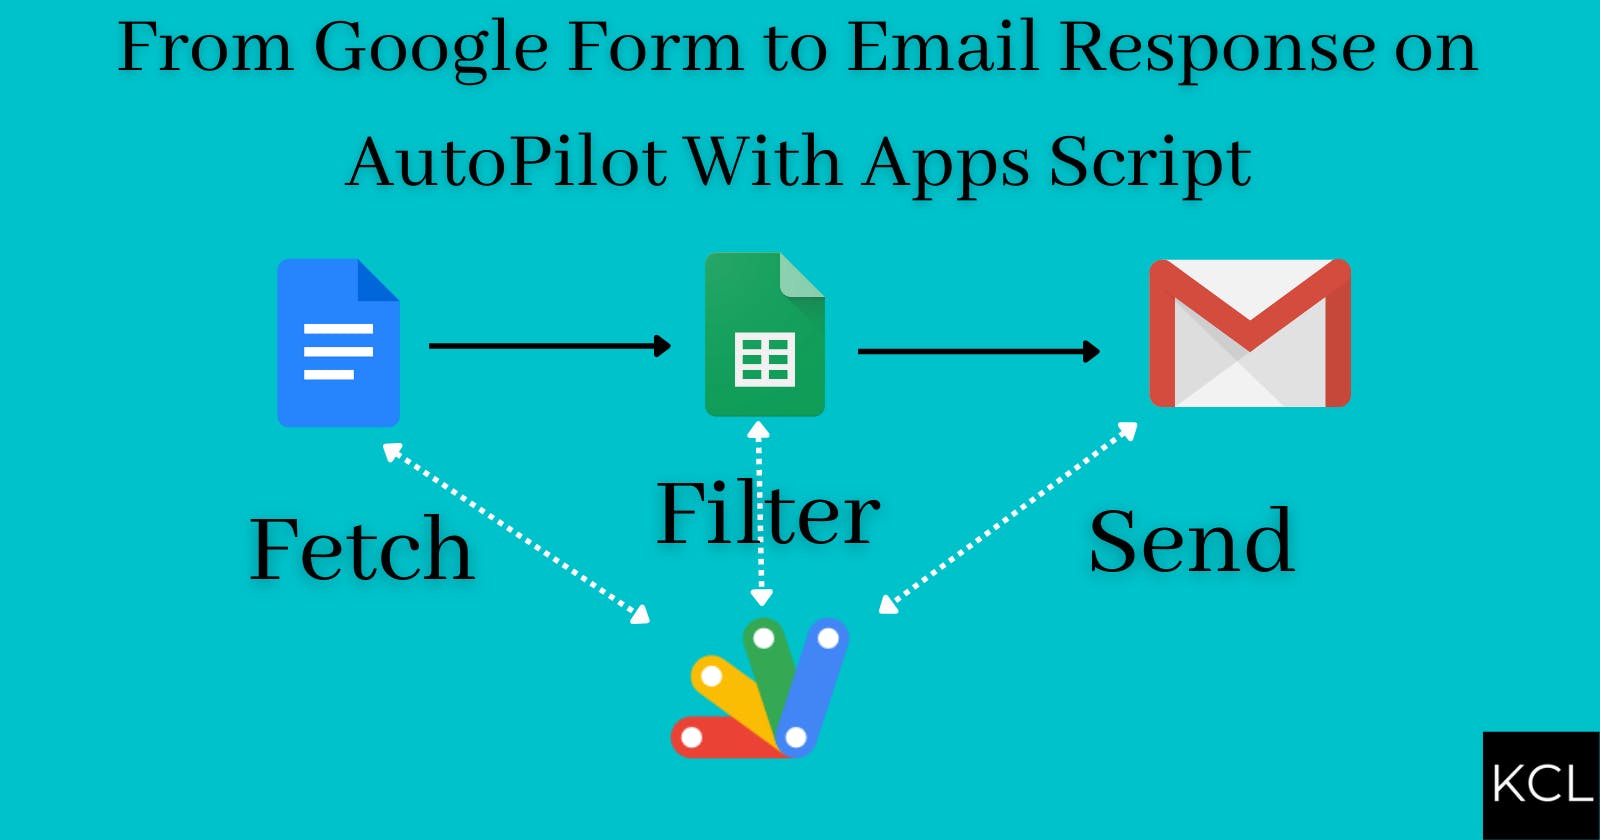 How to Send Google Forms Responses in an Email Automatically?